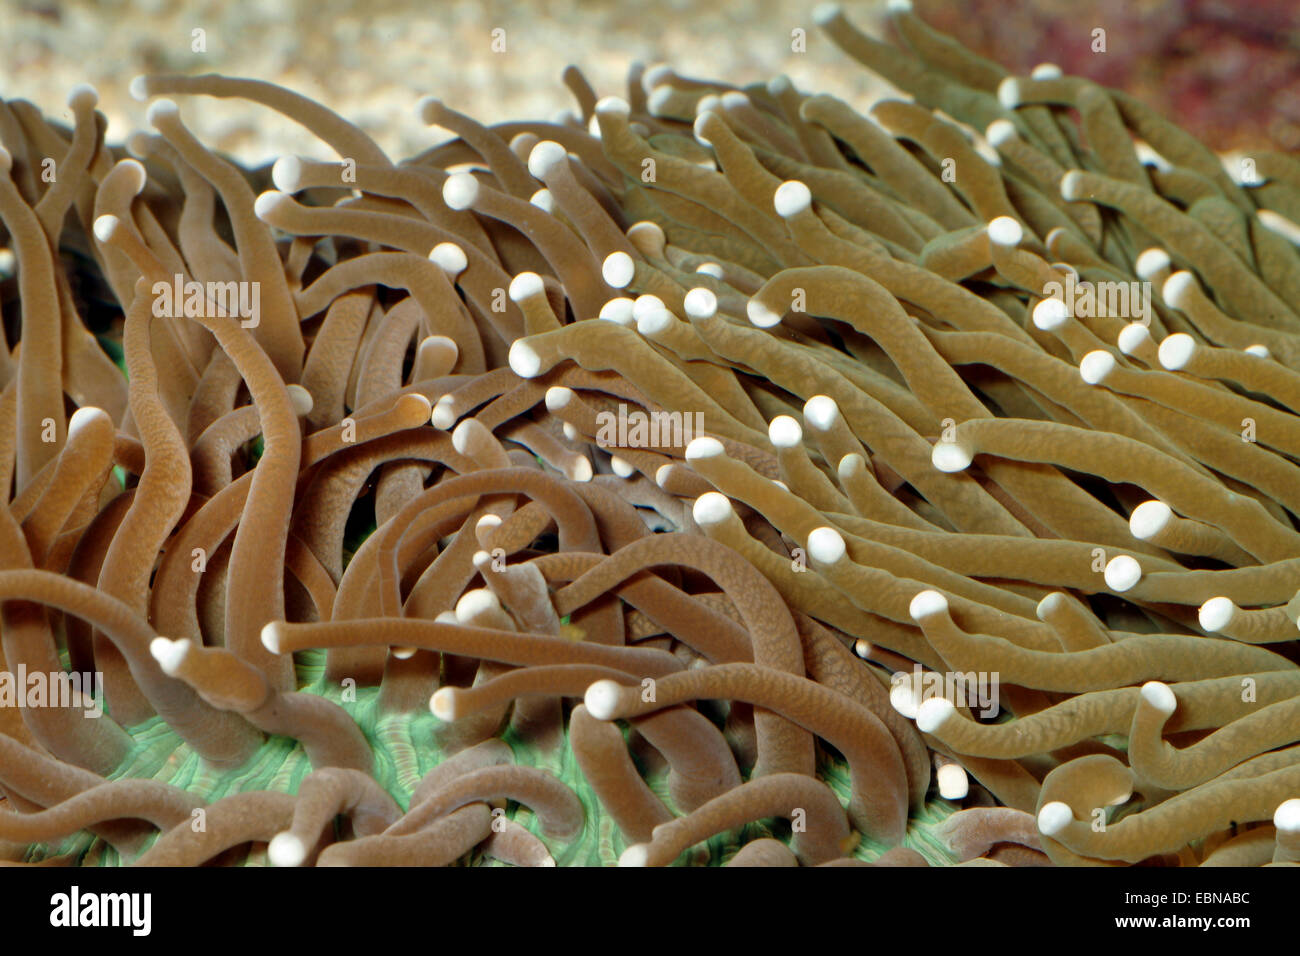 Long Tentacle Plate Coral (Heliofungia actiniformis), close-up view of the tentacles Stock Photo